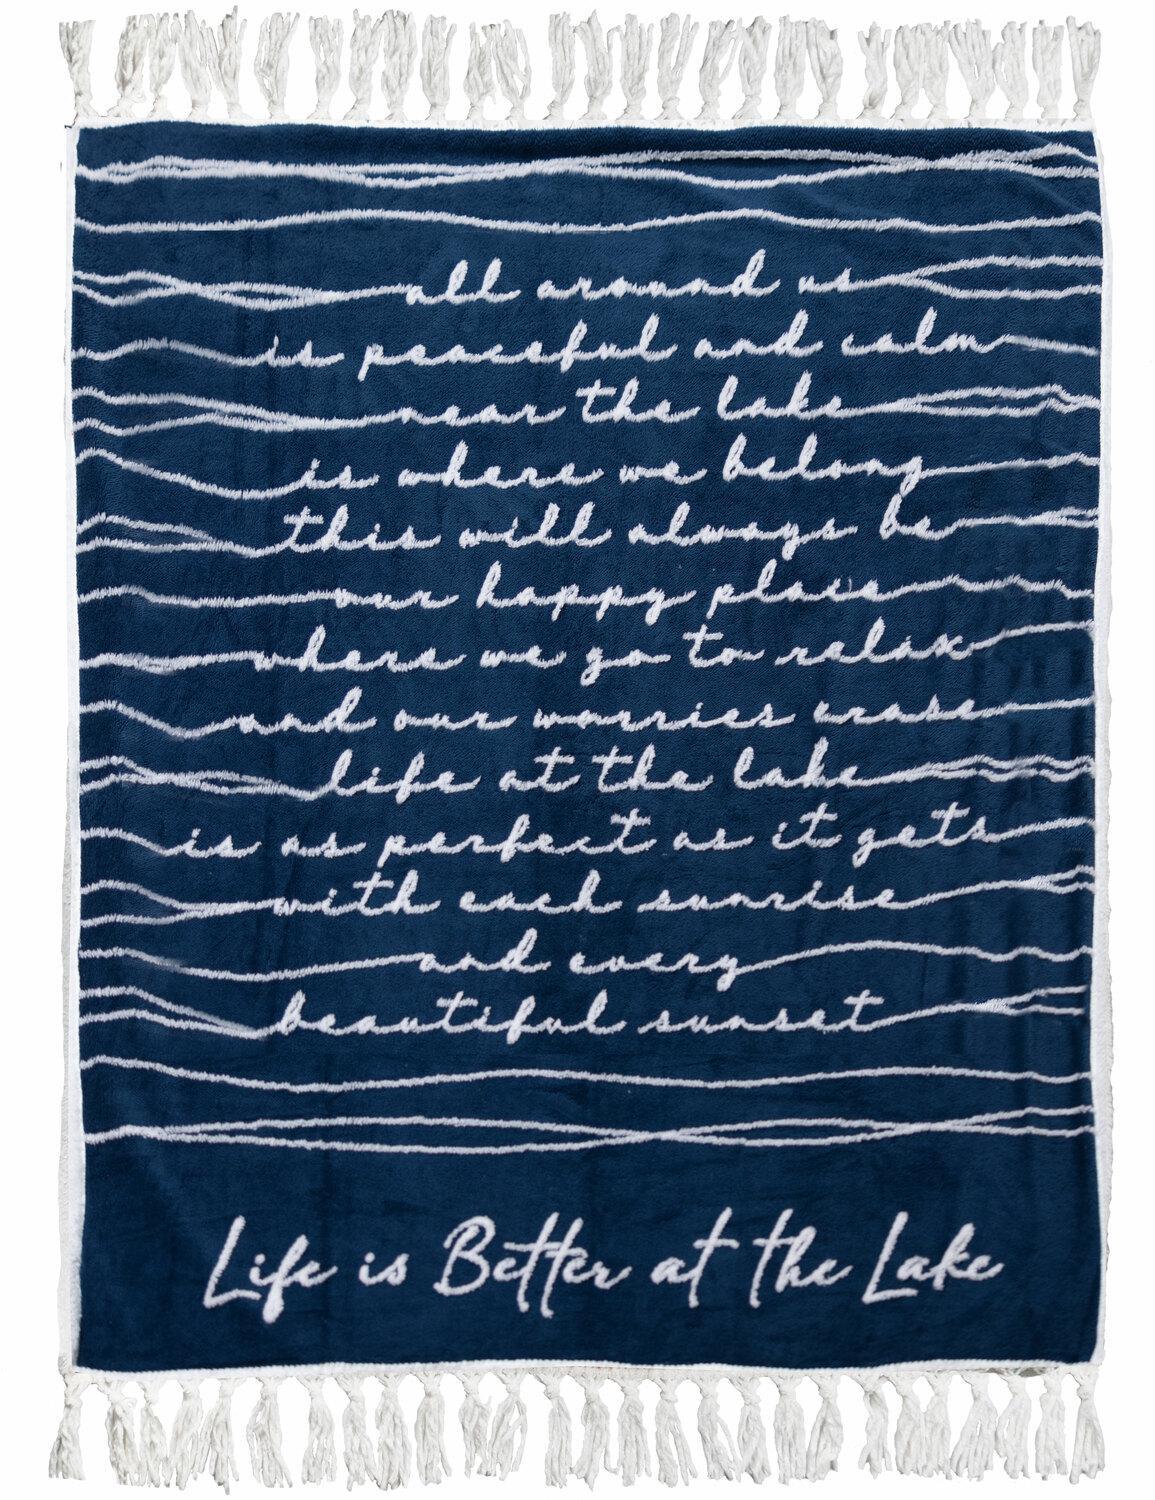 Life Is Better at the Lake - 50" x 60" Inspirational Plush Blanket